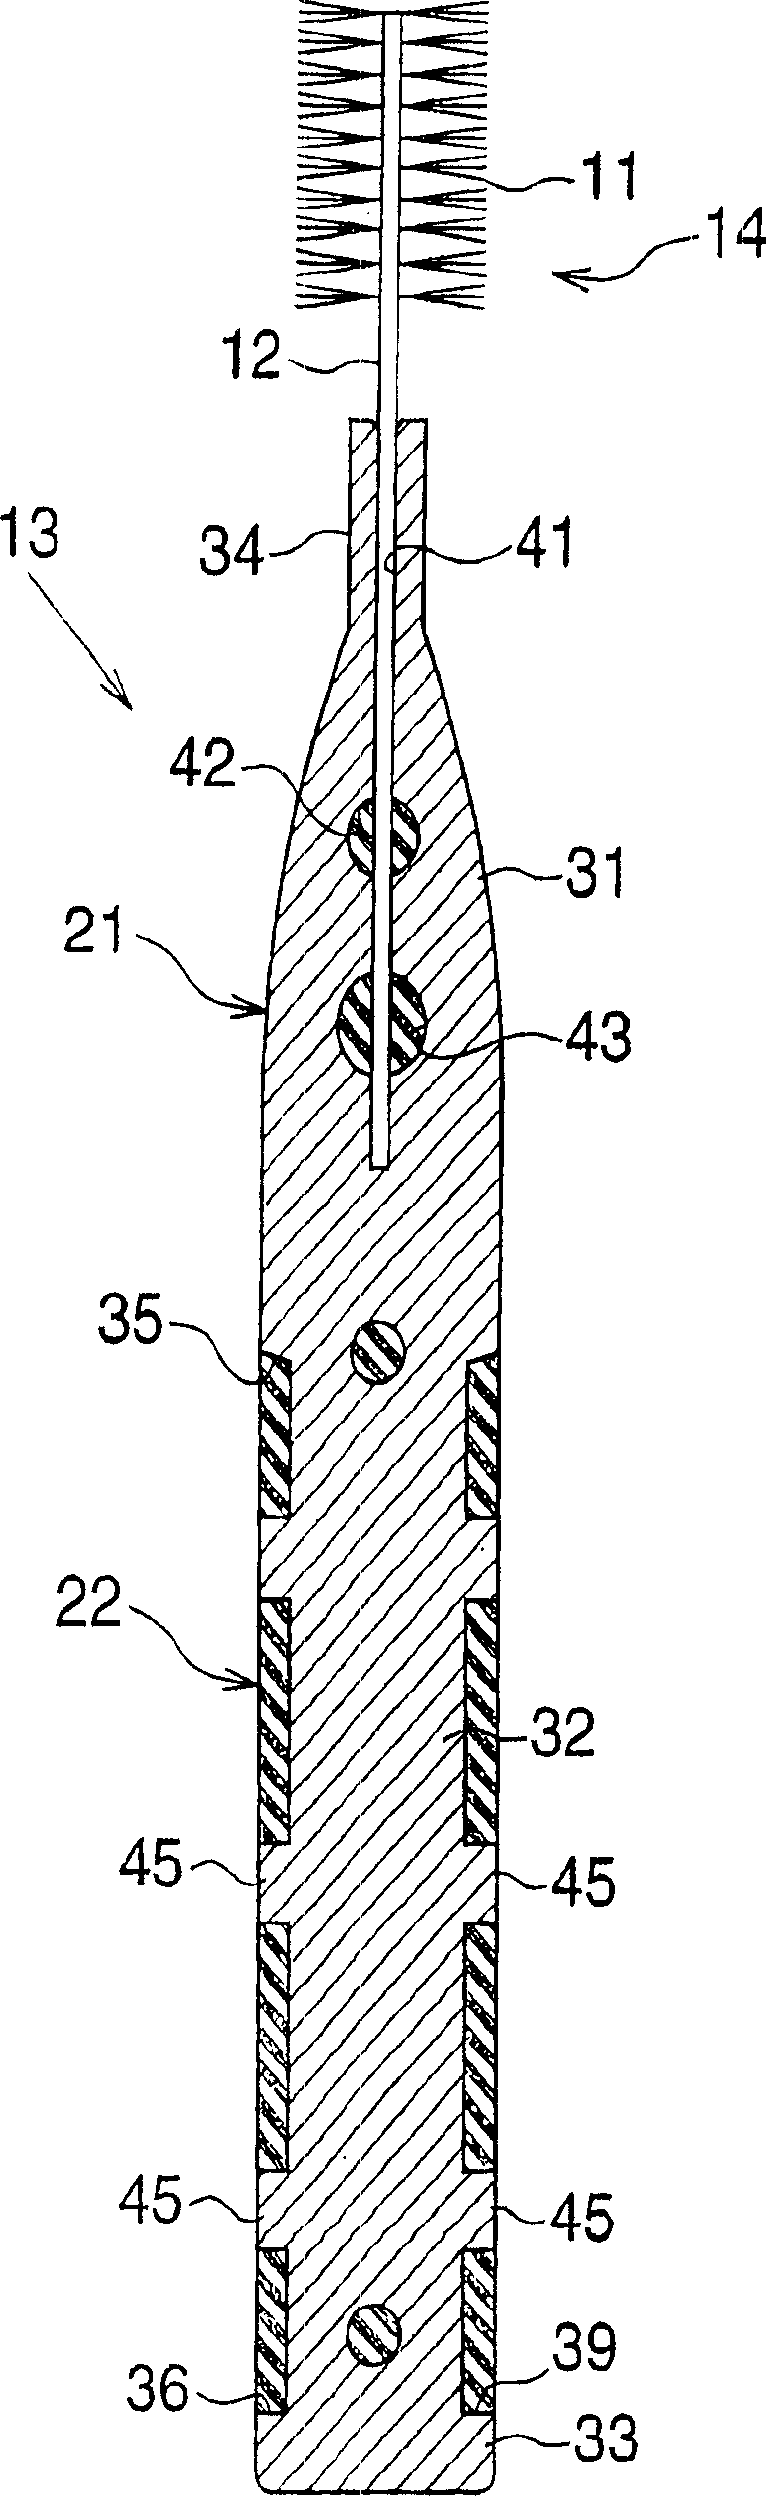 Interdental brush and method of producing the same